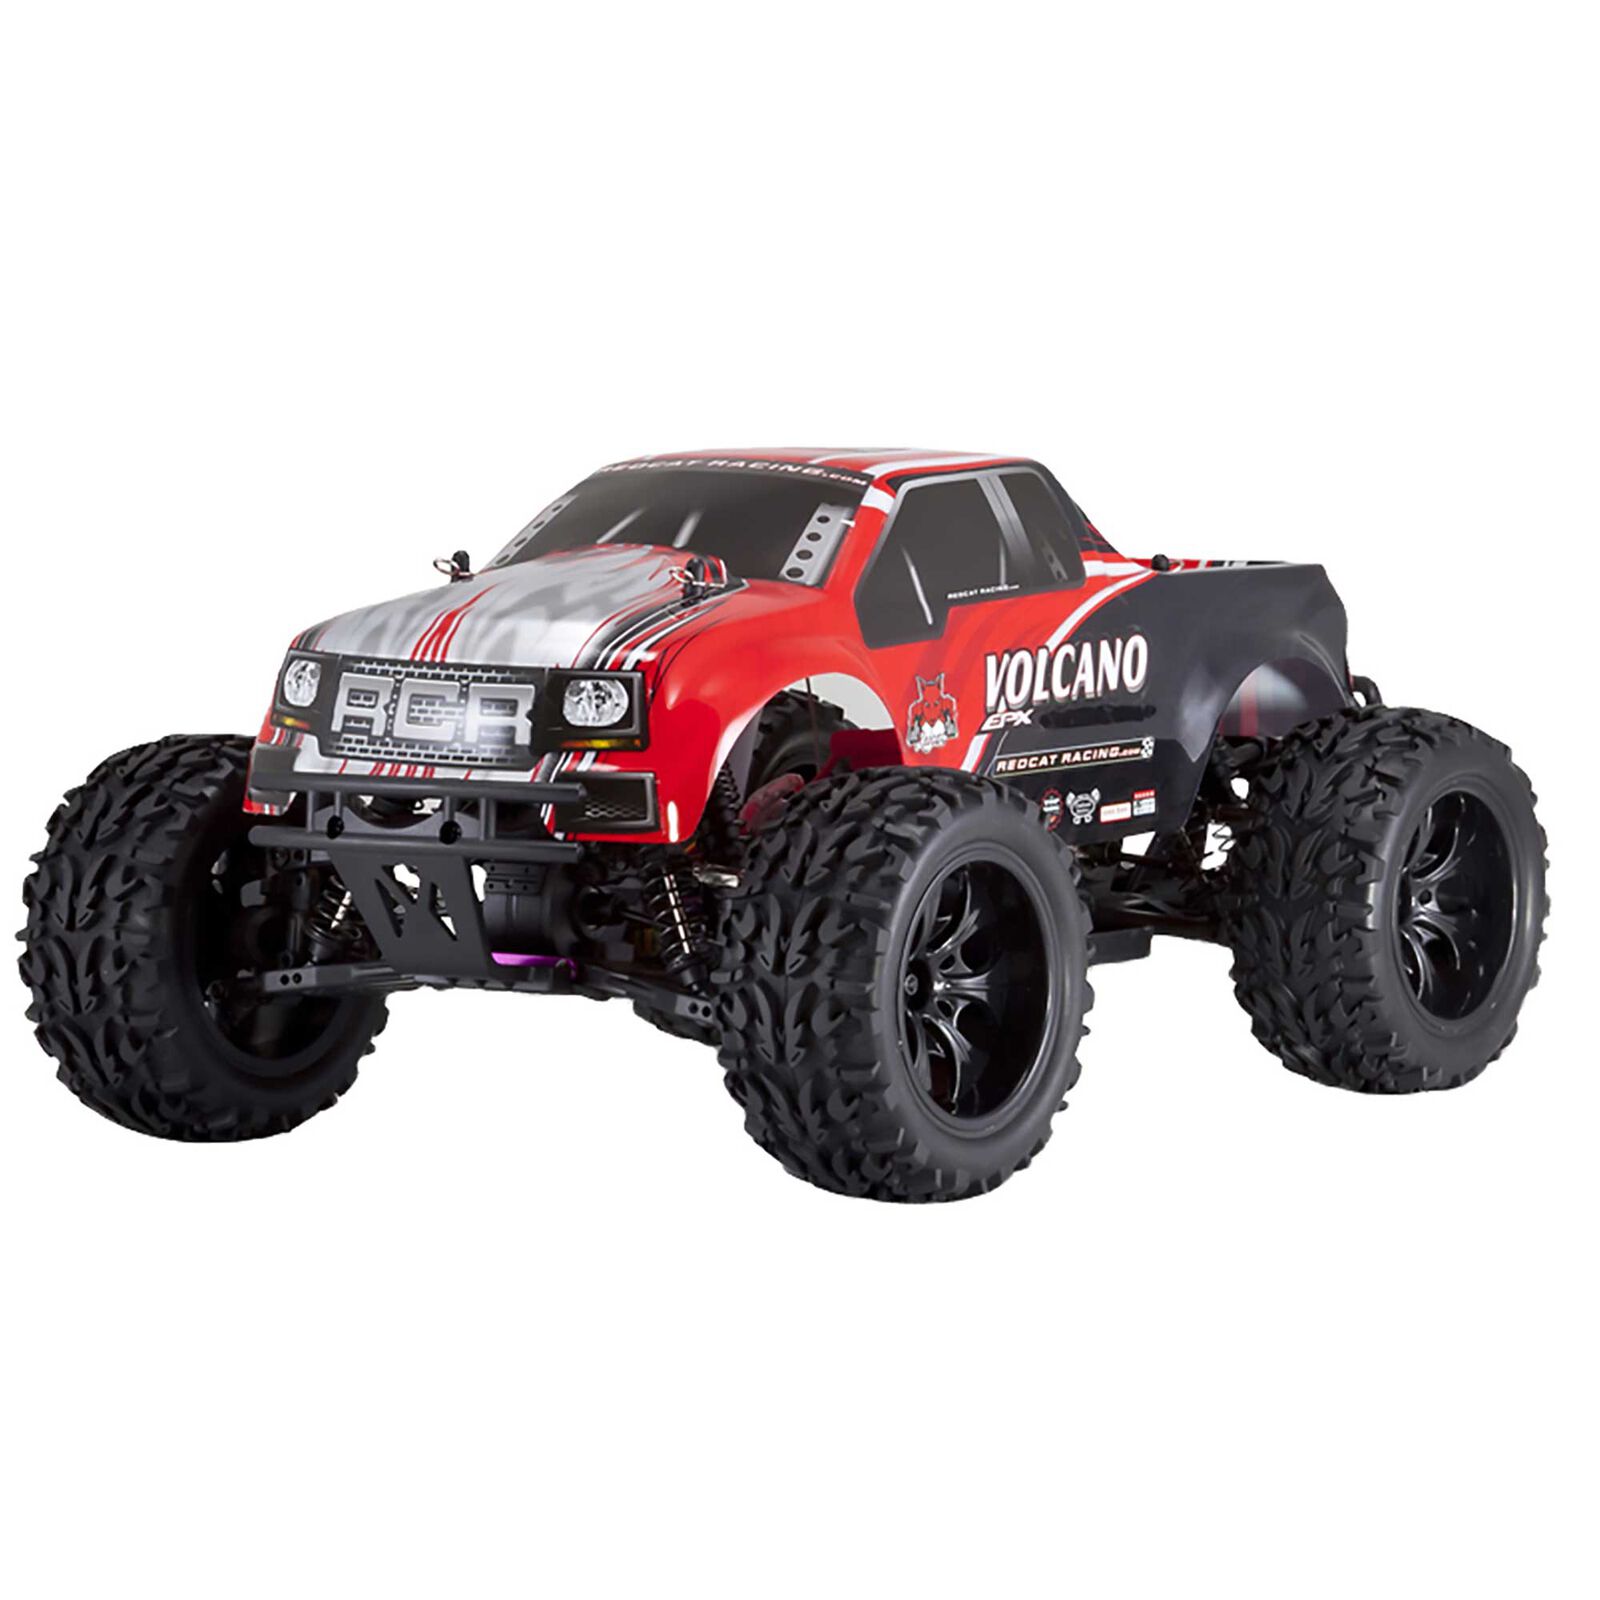 Redcat Racing 1/10 Volcano EPX 4WD Monster Truck Brushed RTR, Red